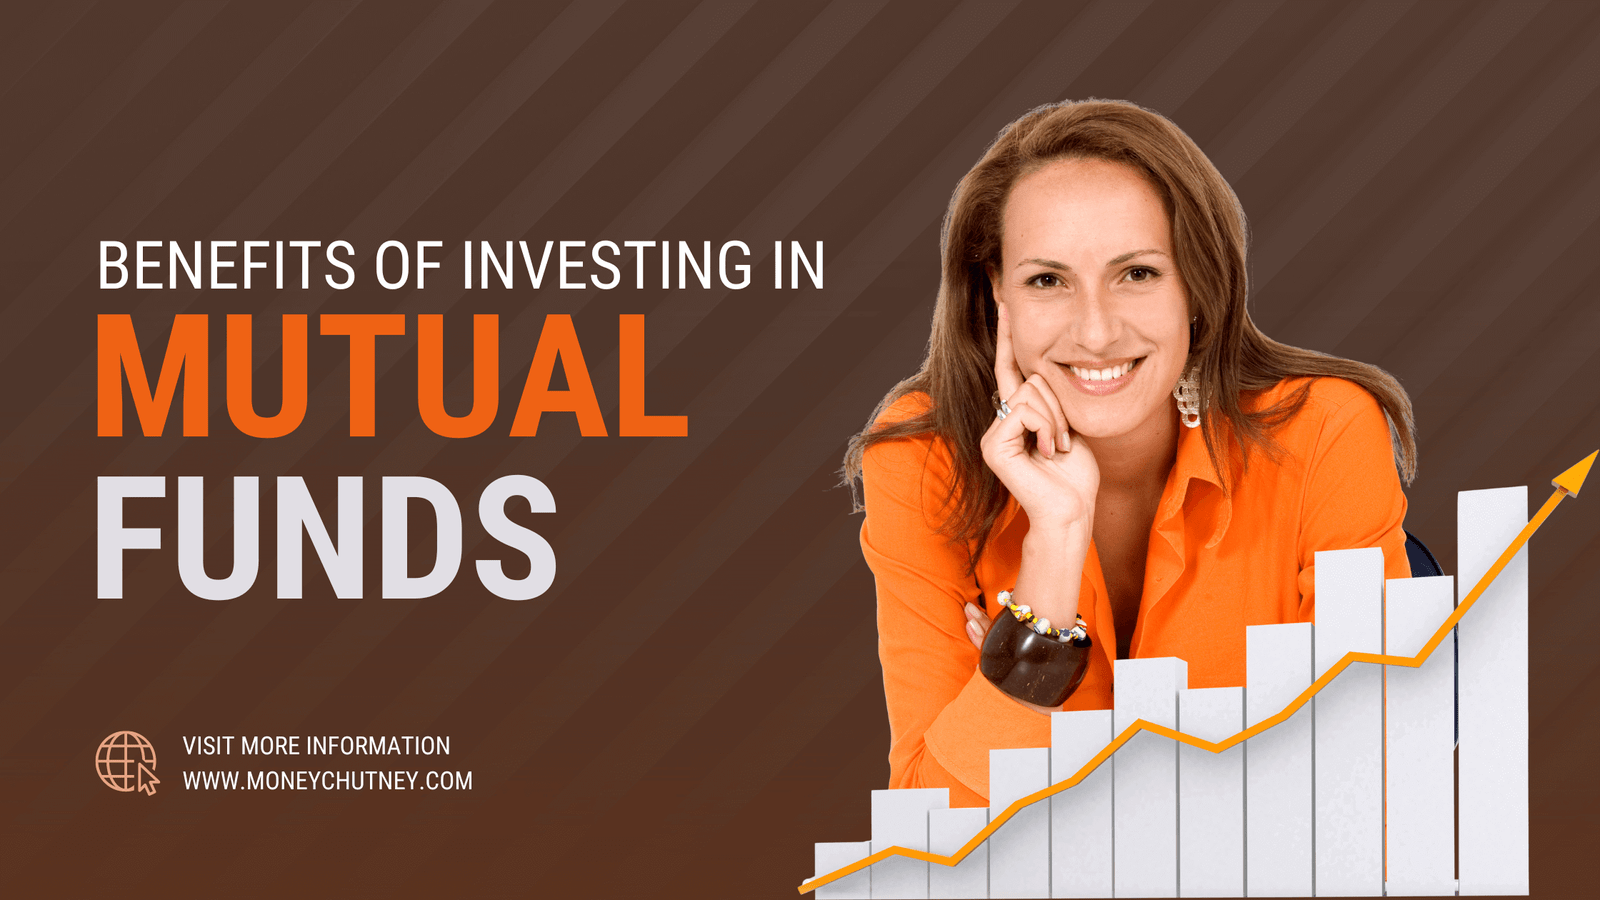 Discover the Advantages of Investing in Mutual Funds